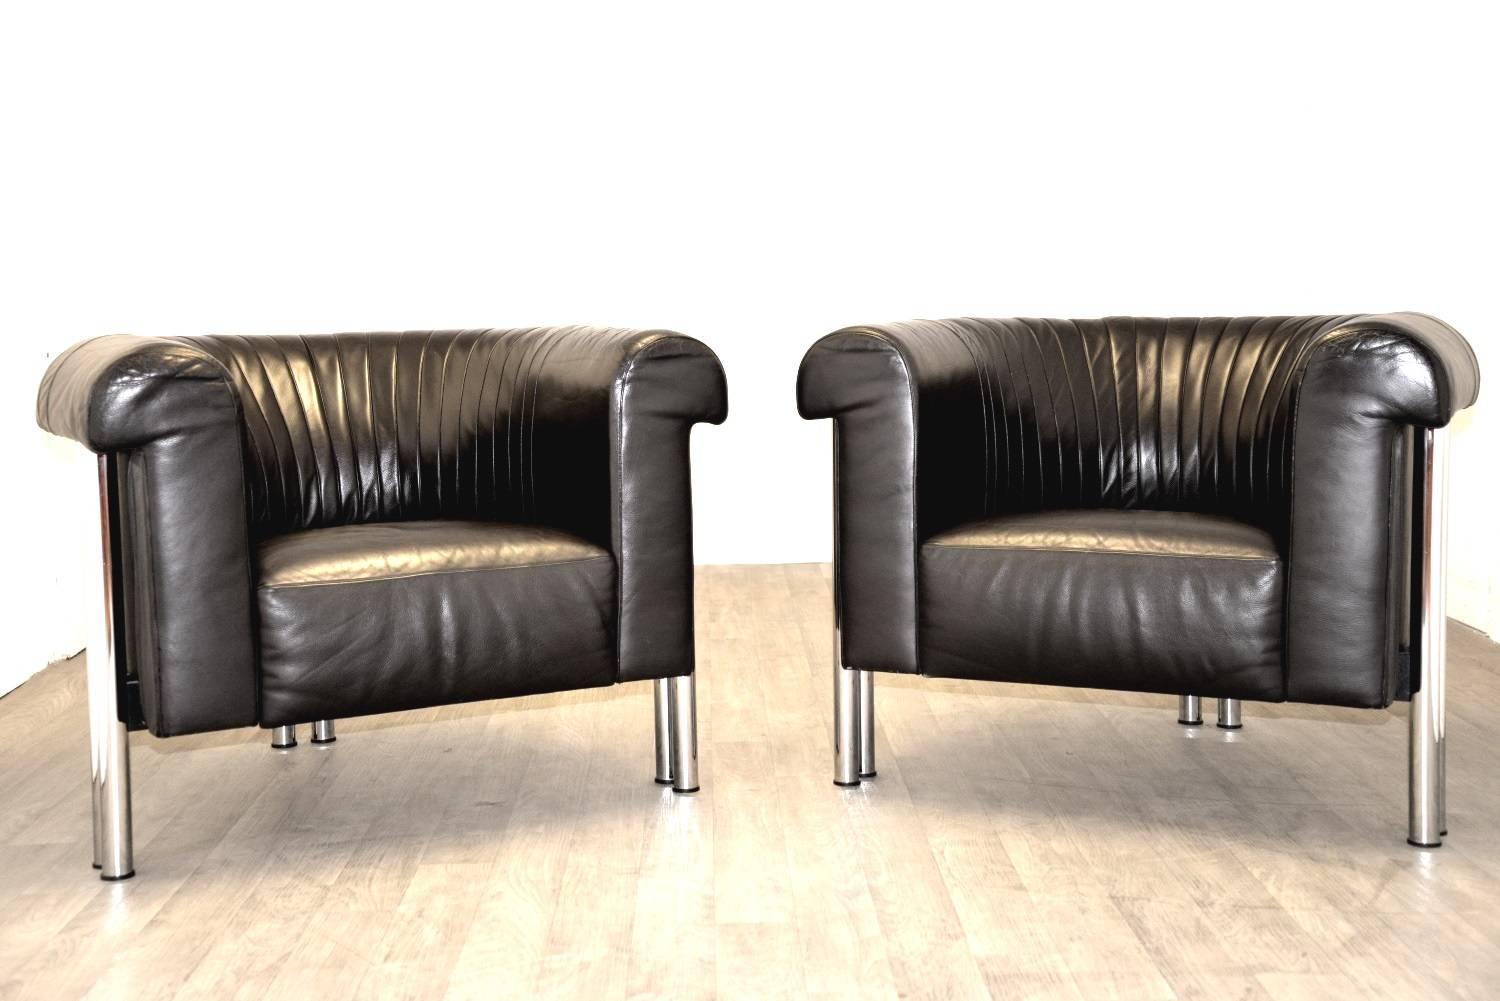 Discounted shipping rates for our US and International customers (from 2 weeks door to door)

We are delighted to bring to you a pair of de Sede lounge chairs in black leather on double chrome-plated legs. Made by De Sede craftsman in Switzerland in